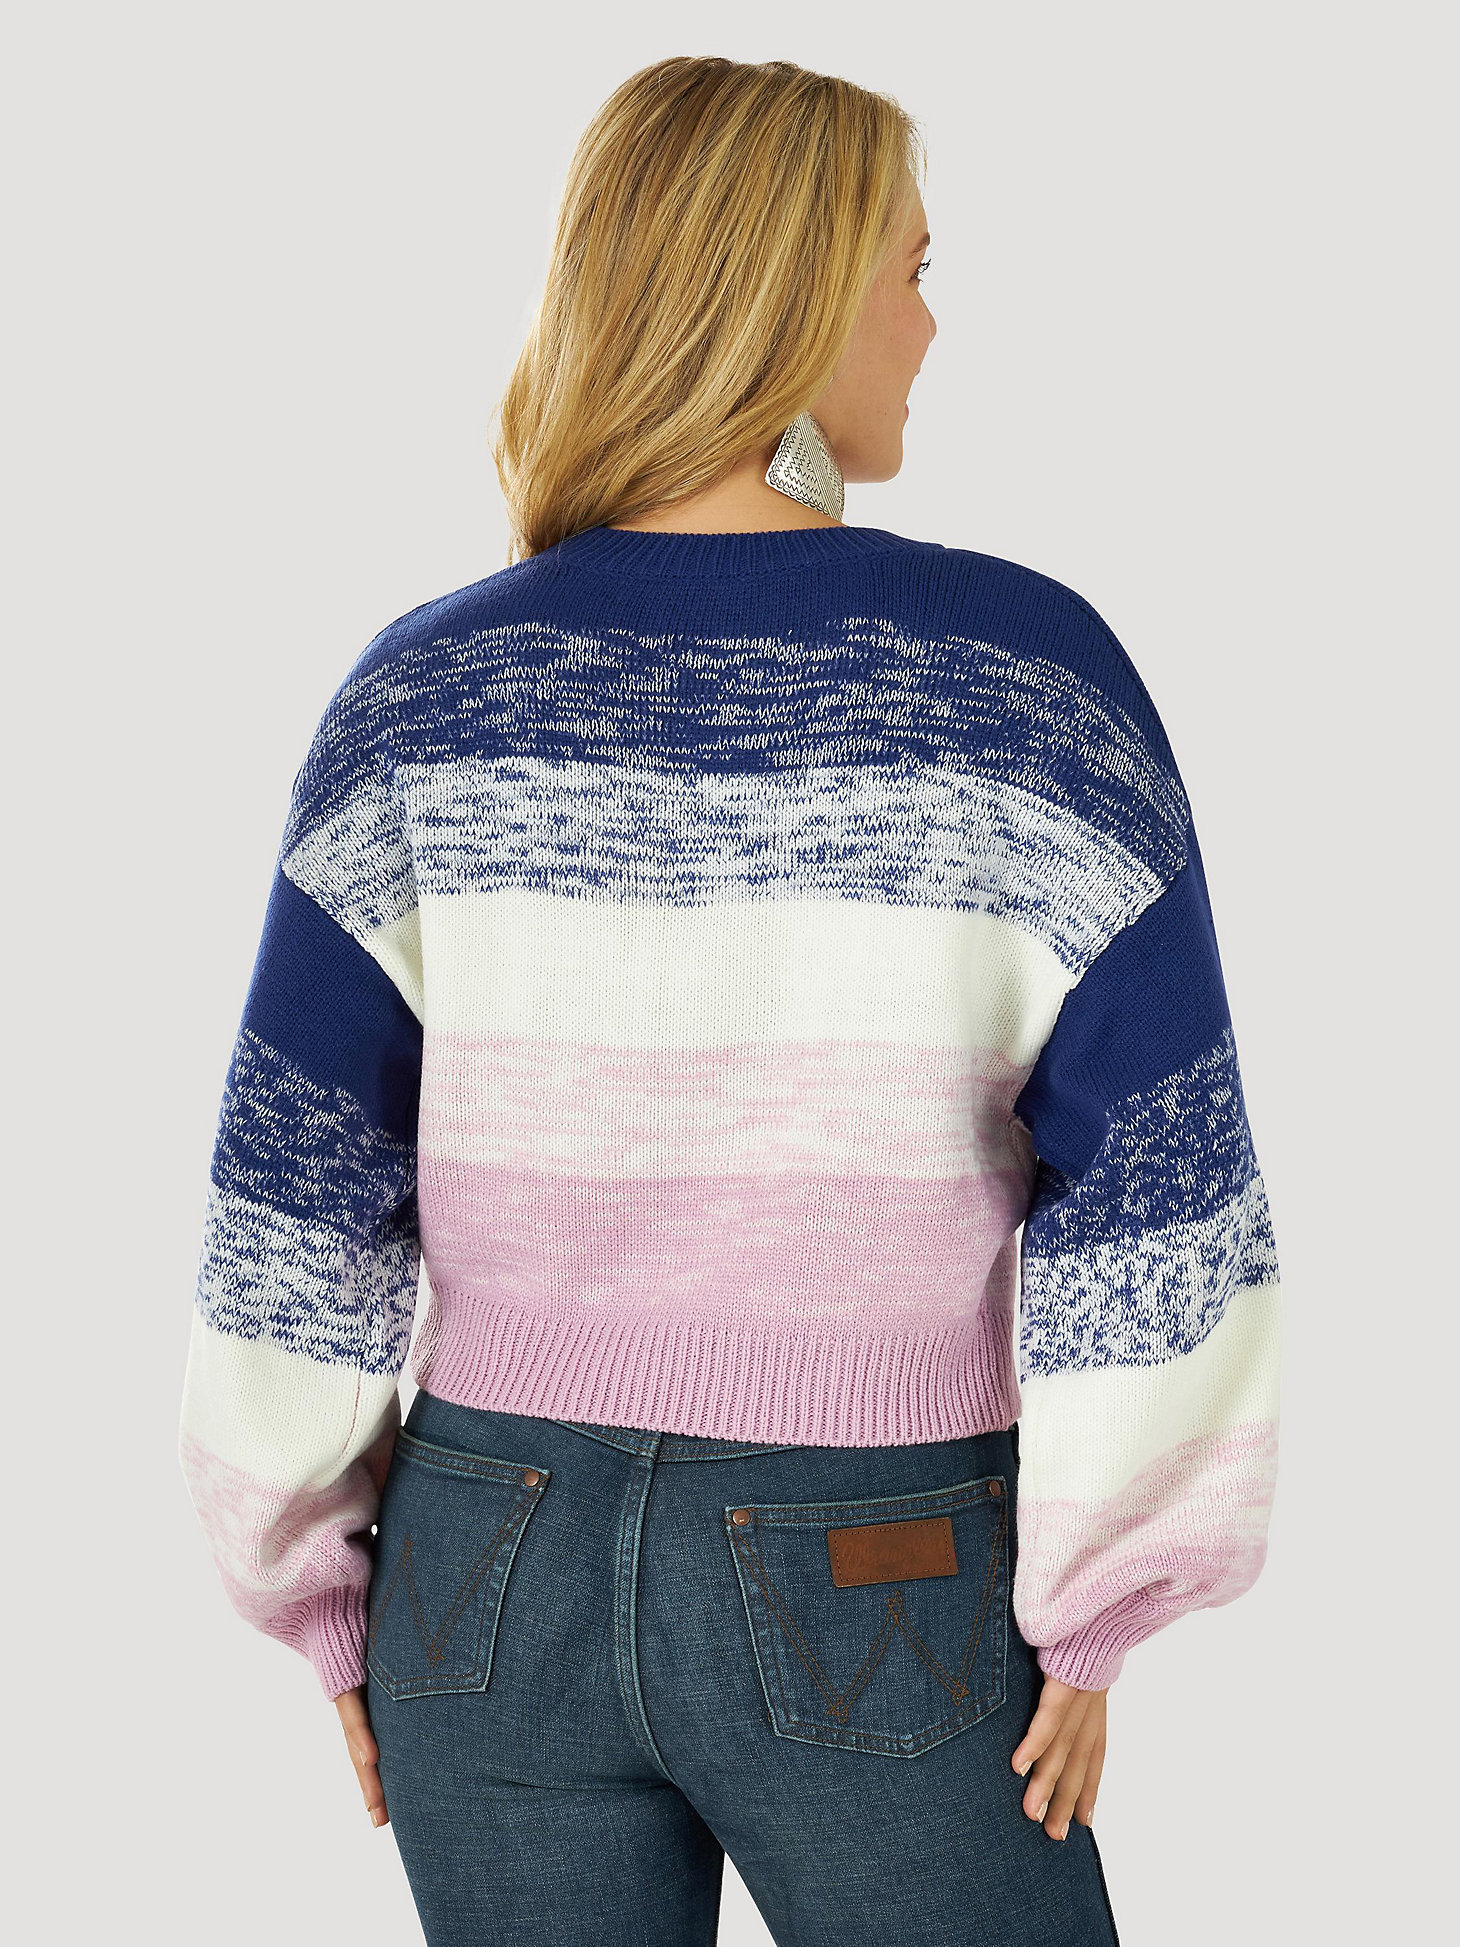 Women's Wrangler Retro® Balloon Sleeve Heathered Ombre Sweater in blue ombre alternative view 1